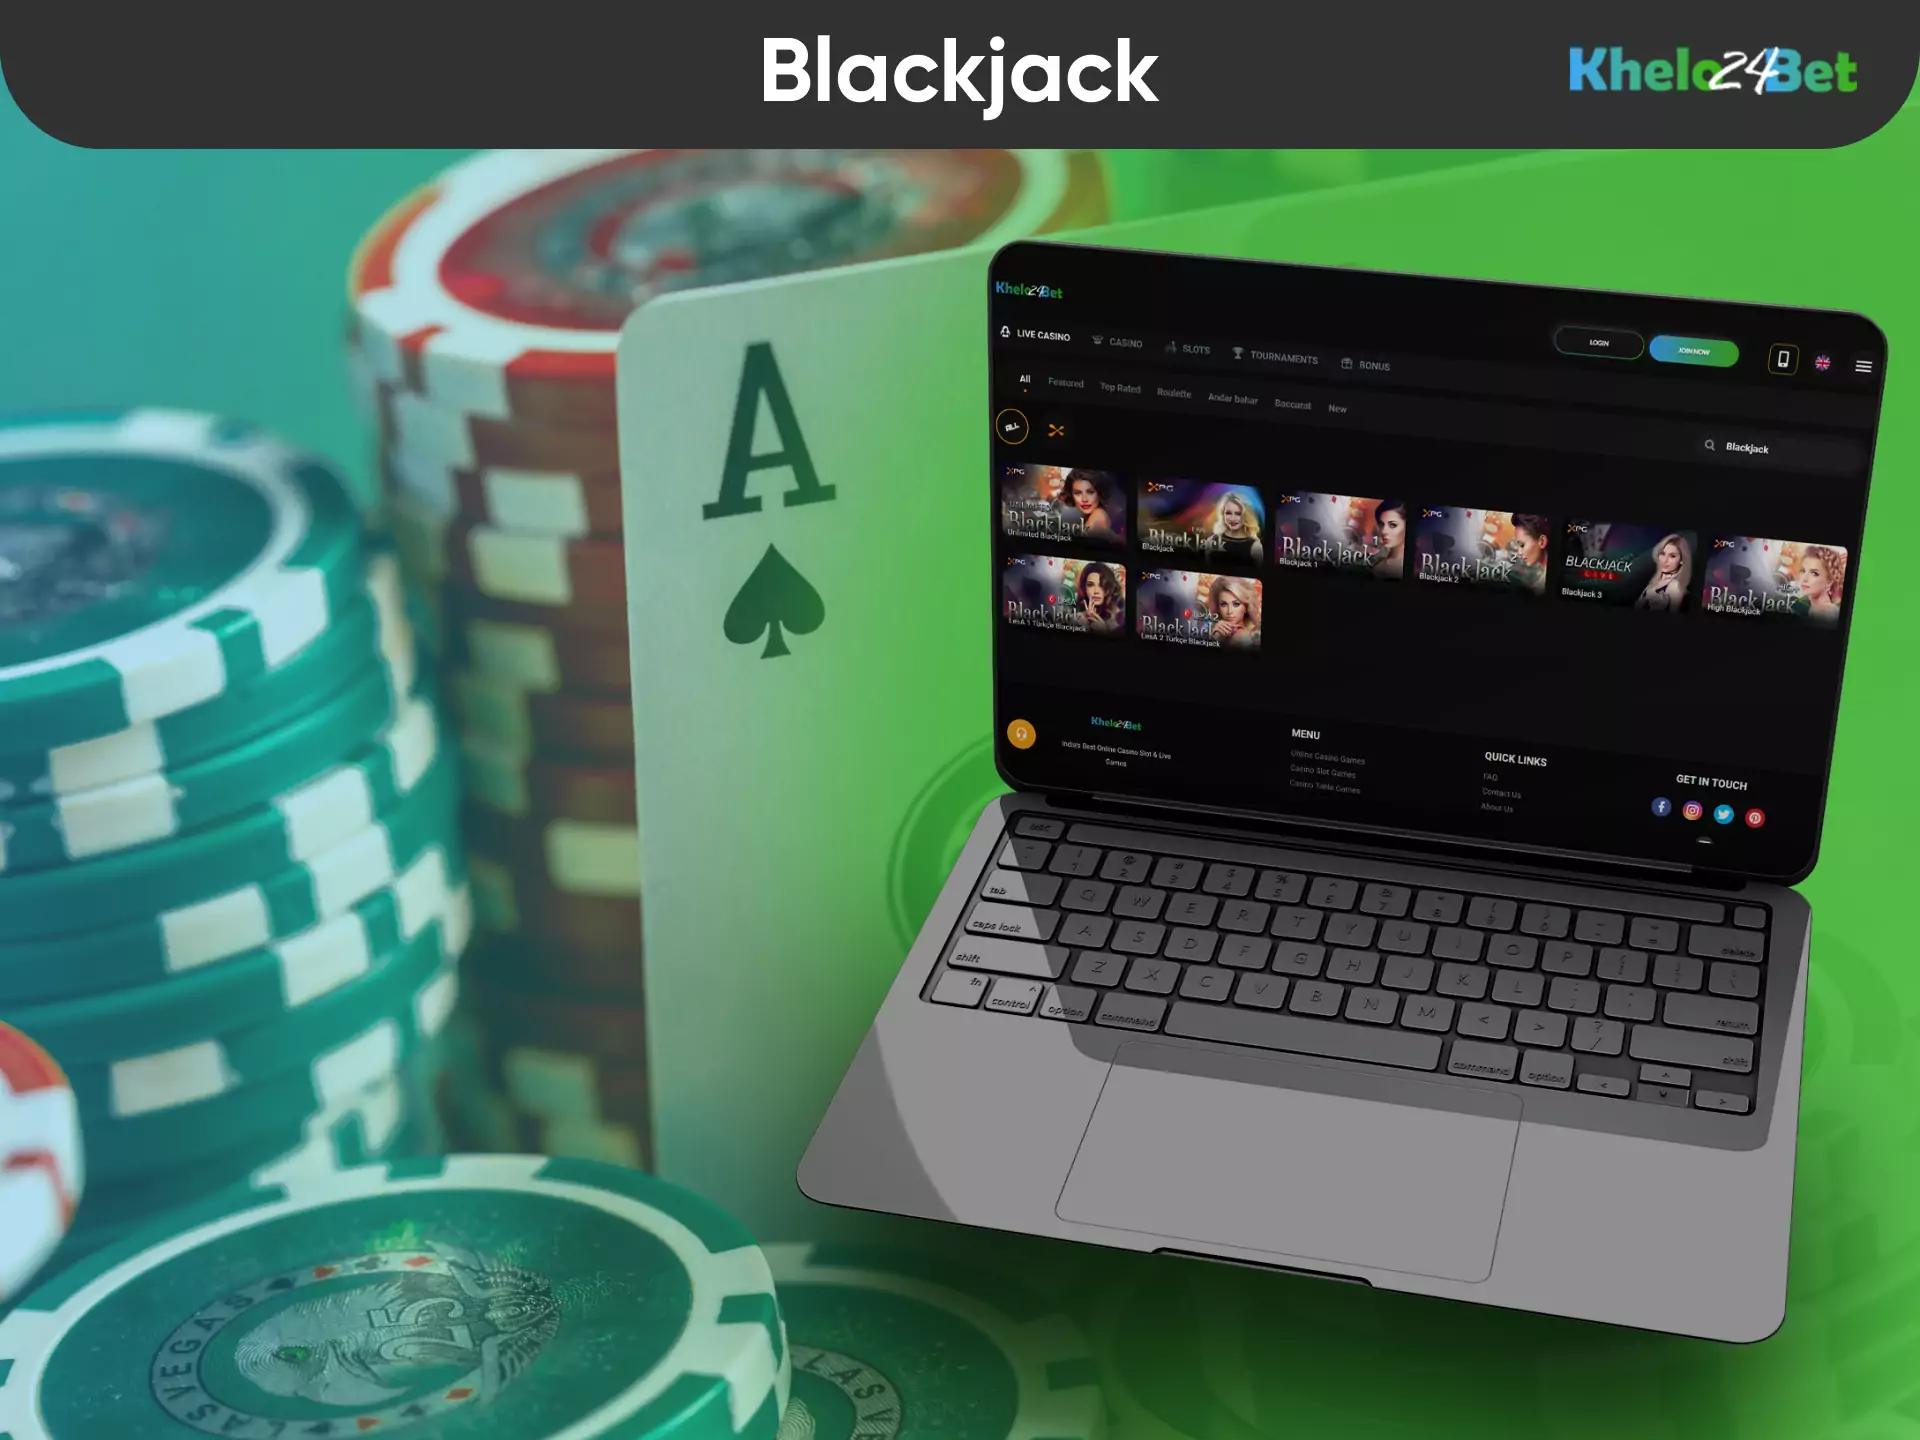 Blackjack is one of the most popular games in the Khelo24bet Casino.